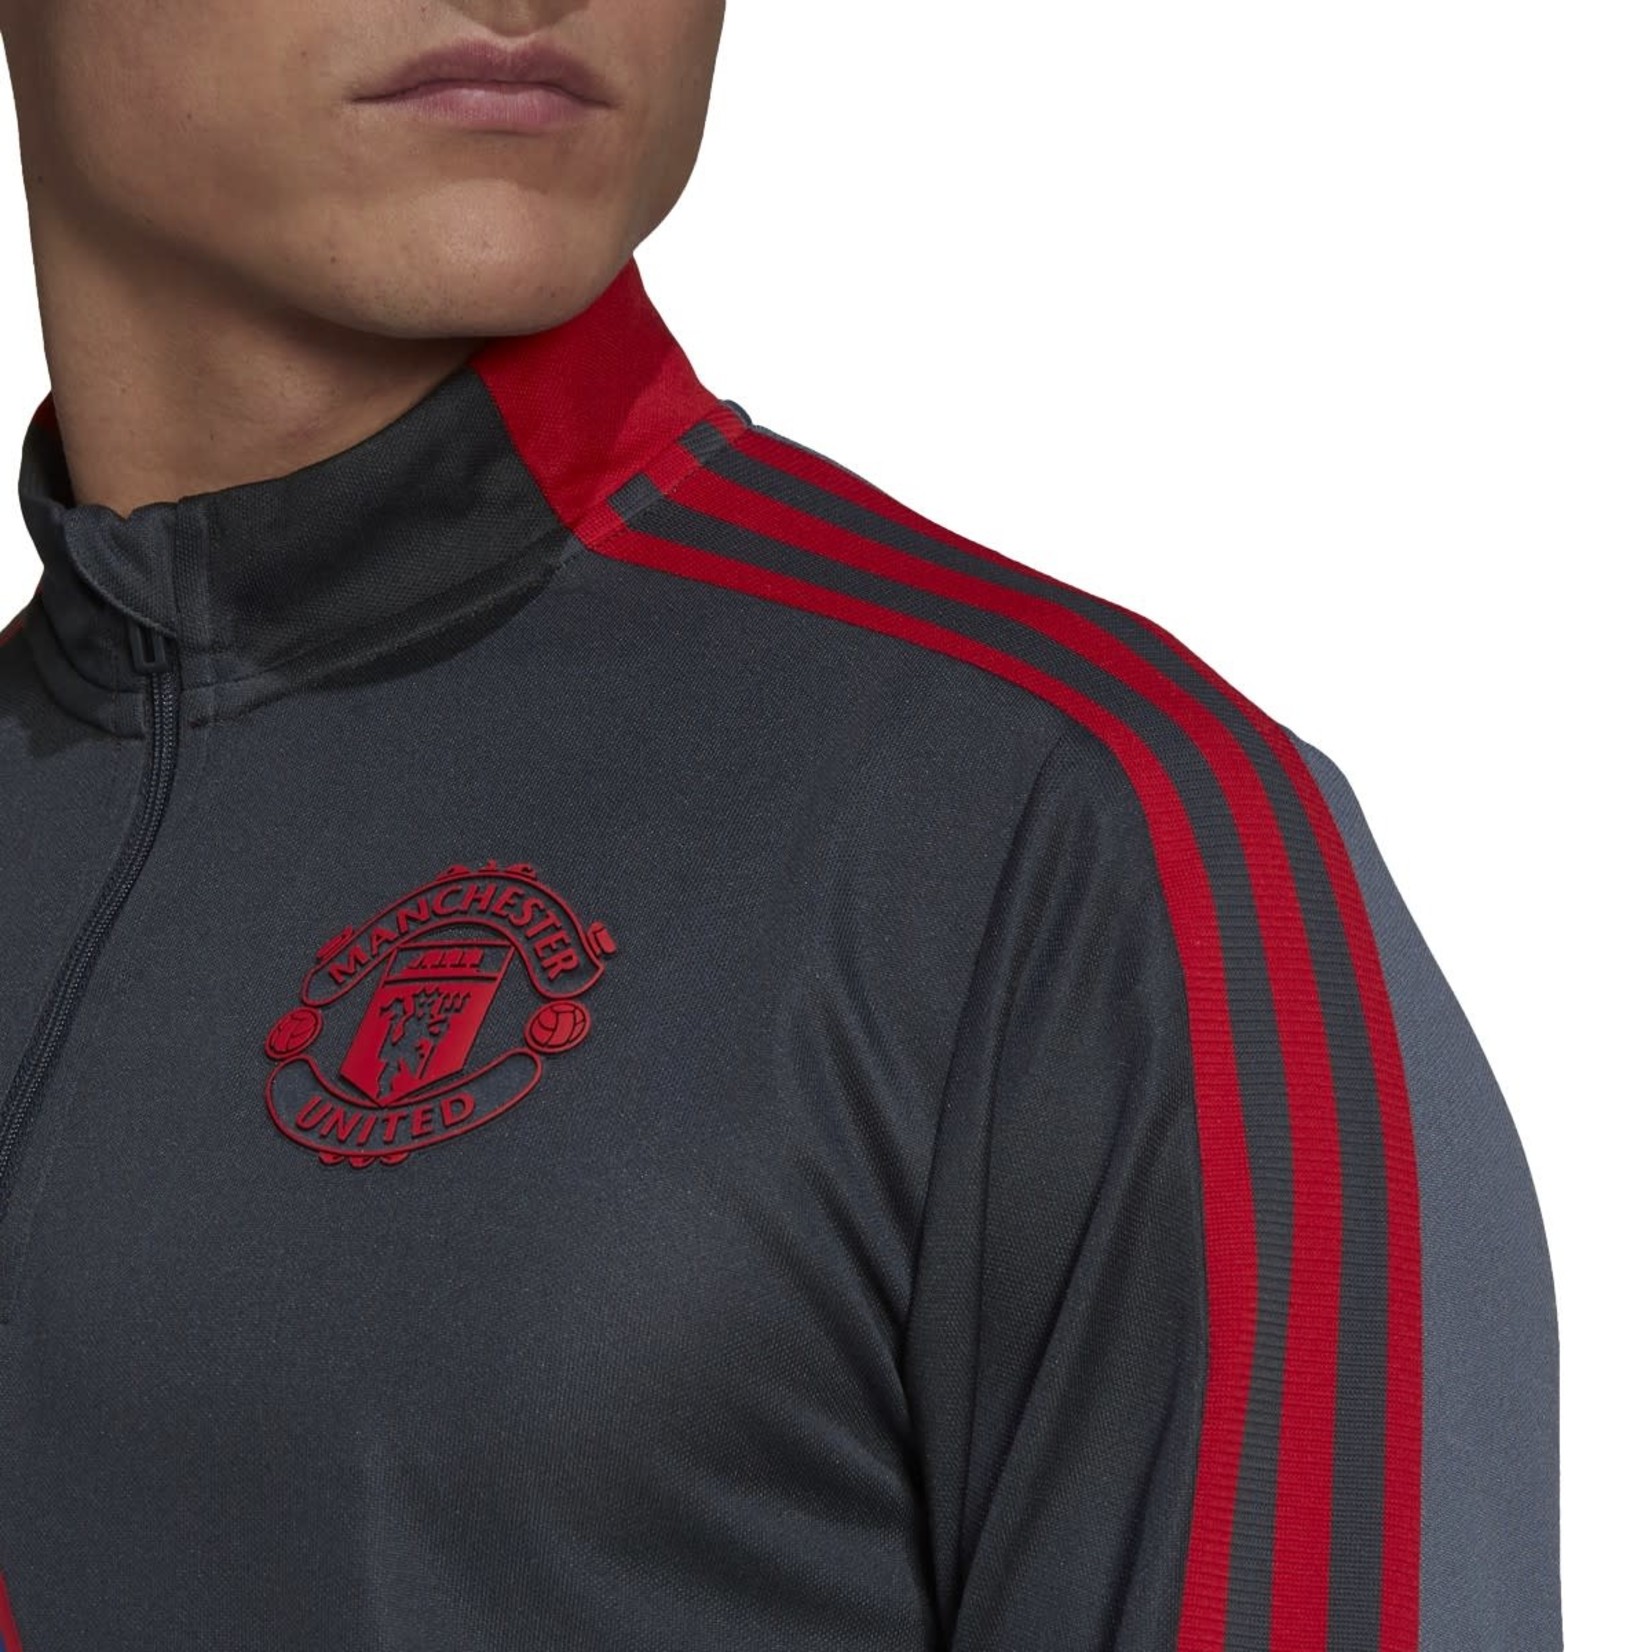 ADIDAS MANCHESTER UNITED HUMANRACE TRAINING TOP (GRAY/RED)